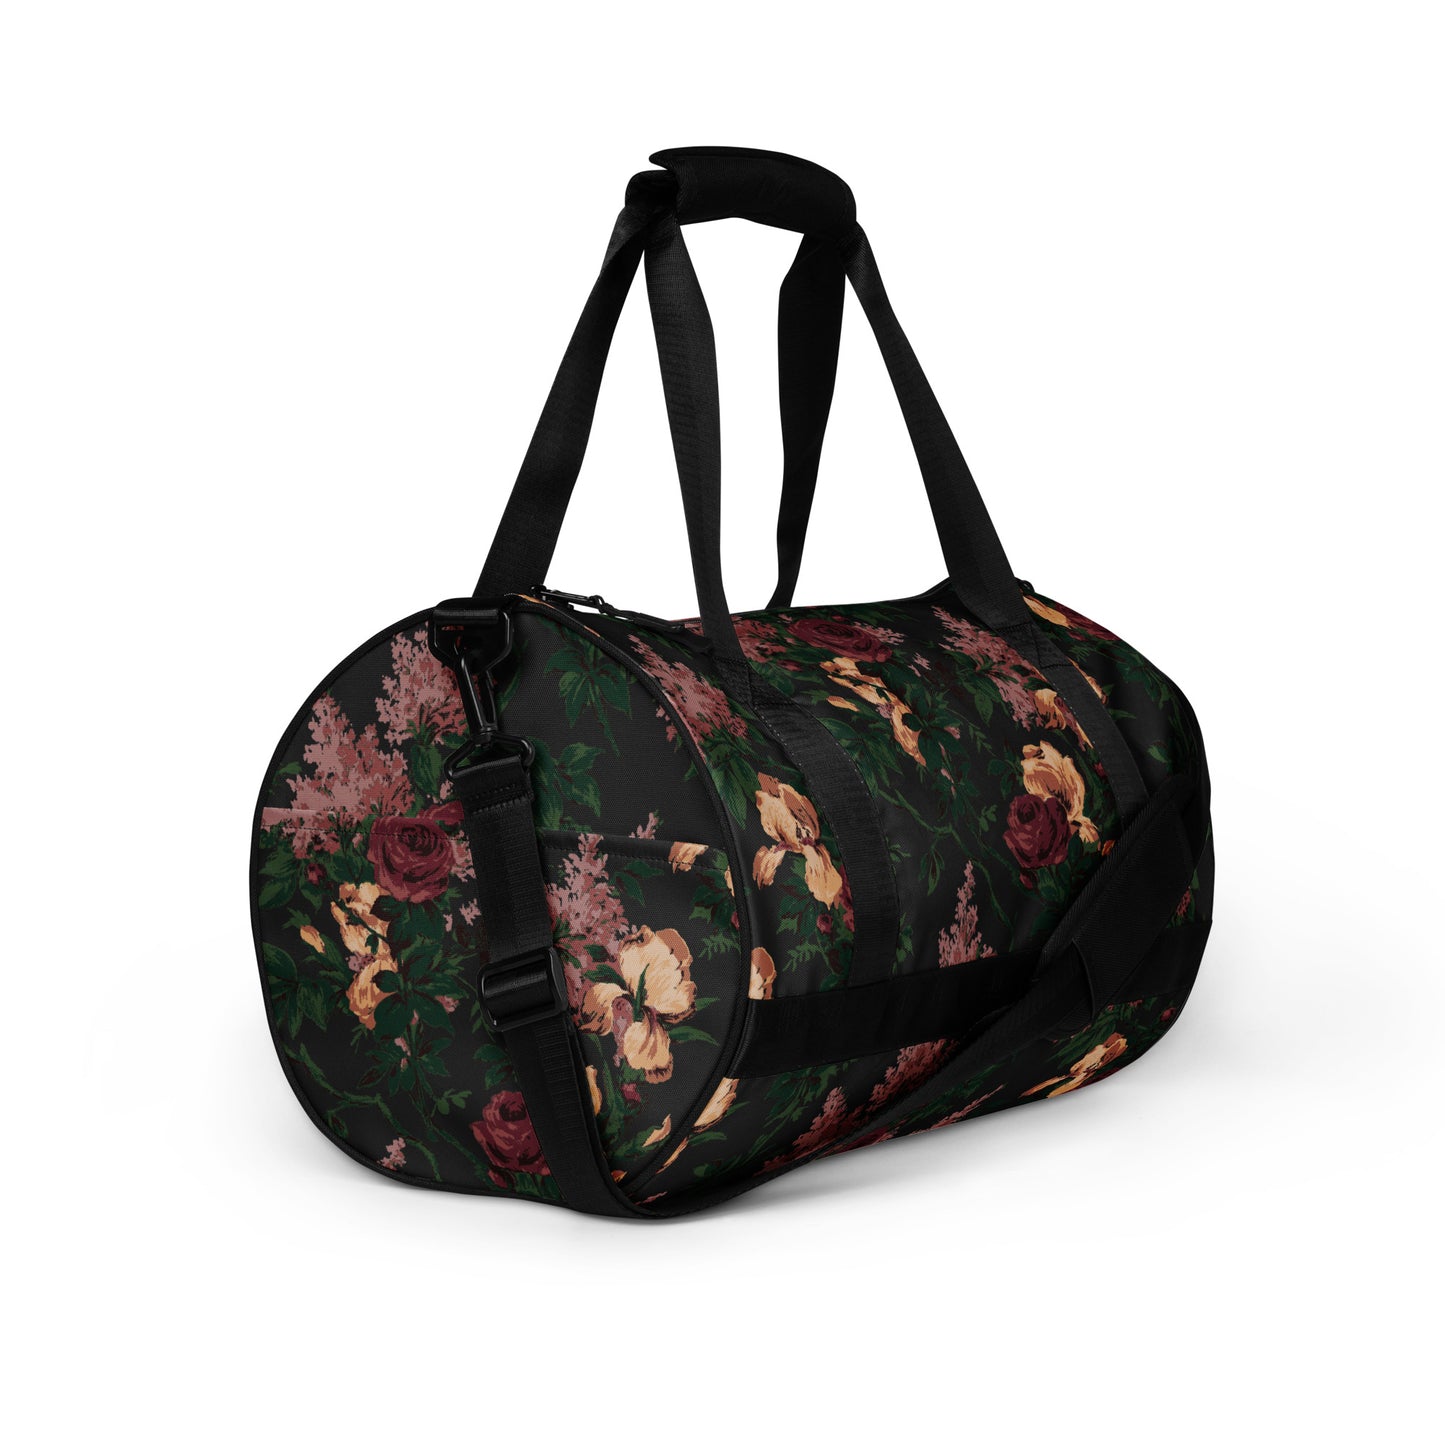 Hillary Overnighter Carry On Workout Duffle Bag in Dark Bella Roses Floral | Pinup Couture Relaxed